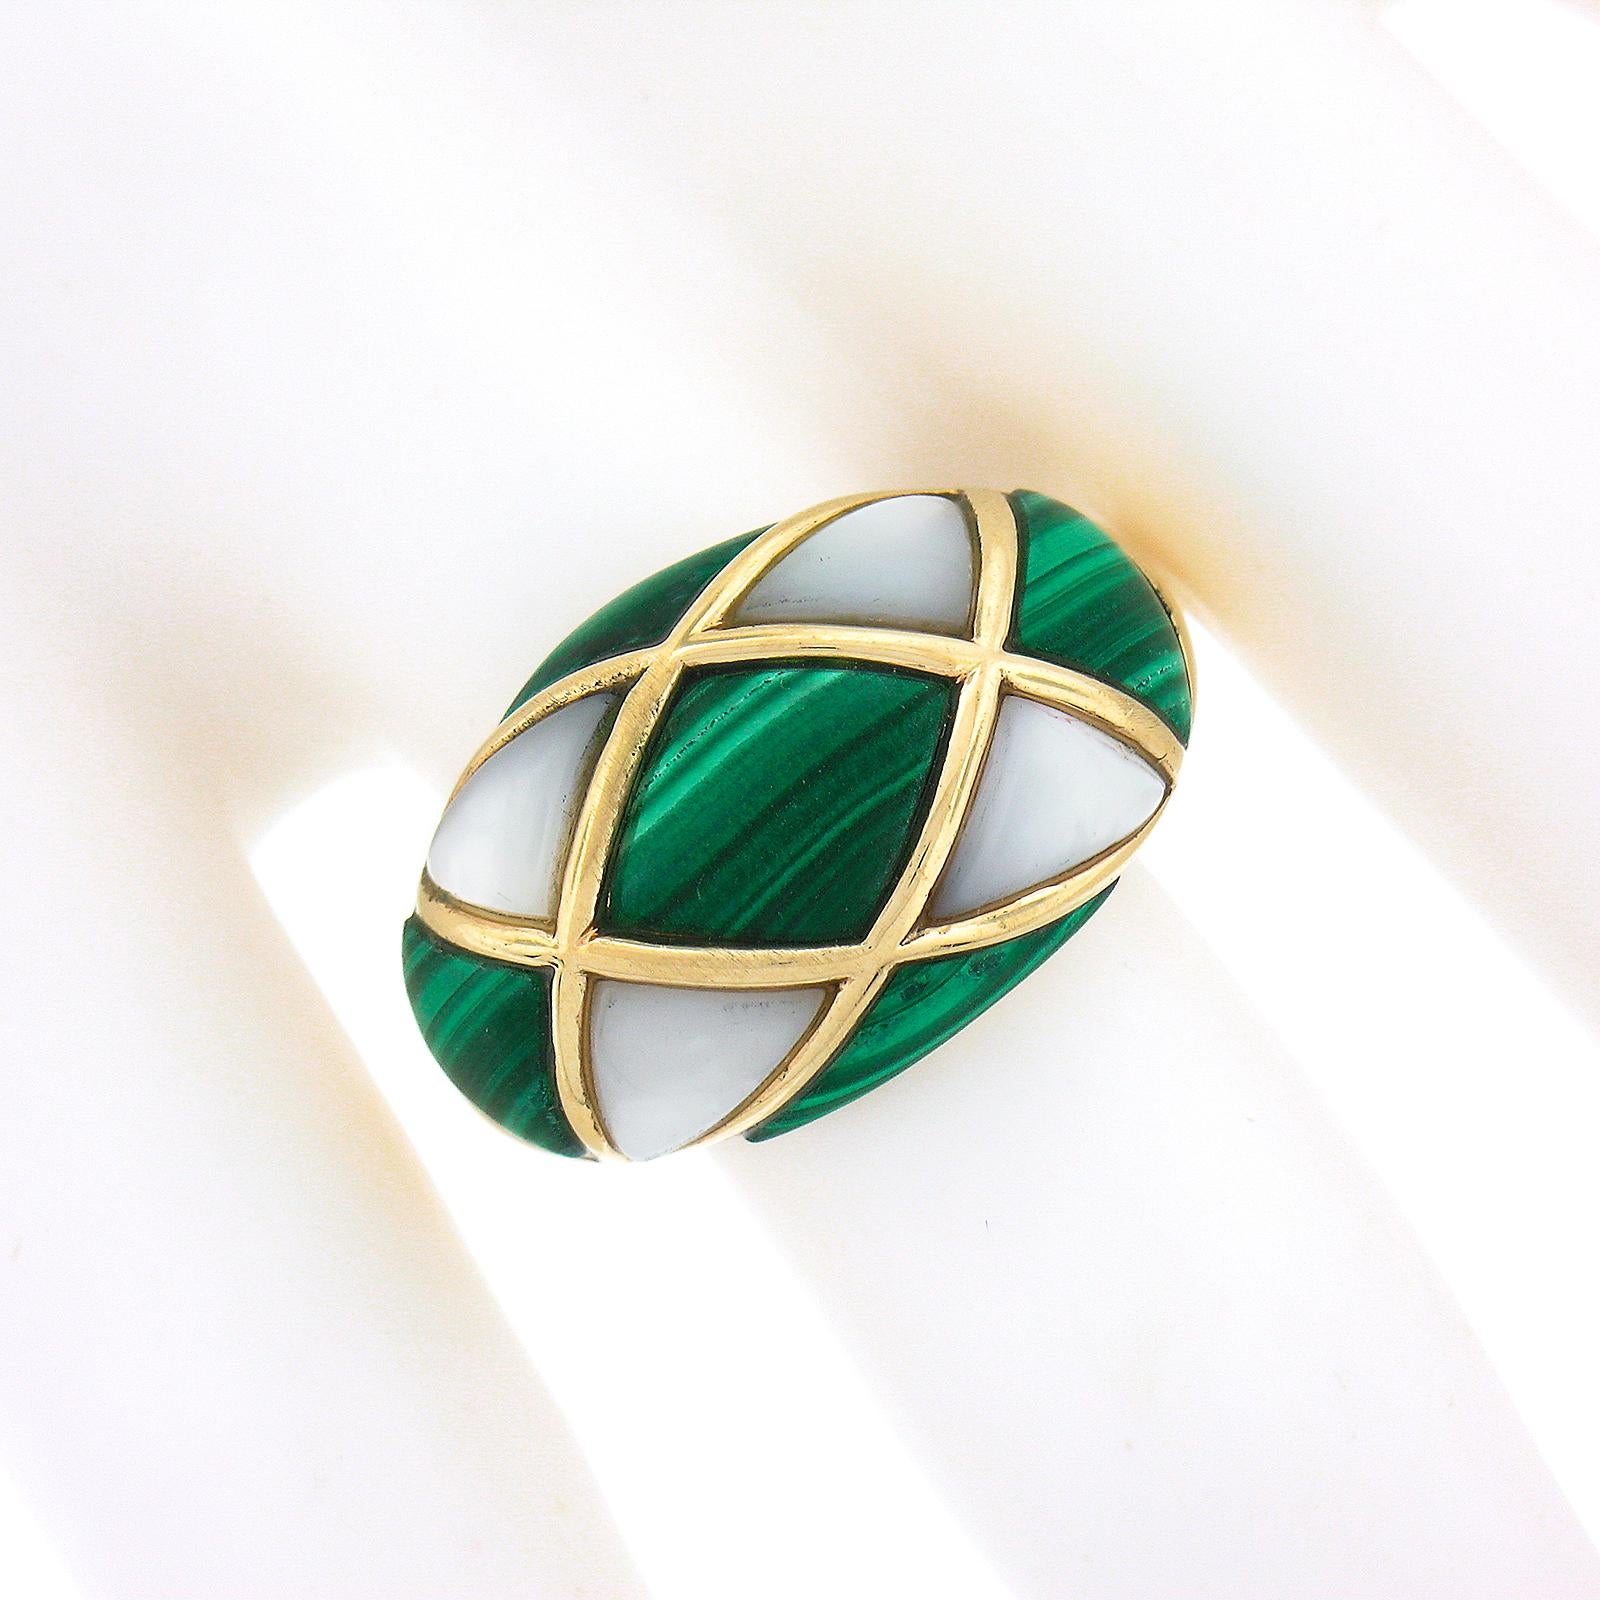 Vintage 14K Yellow Gold Inlaid Malachite & Mother of Pearl Wide Domed Bombe Ring In Excellent Condition For Sale In Montclair, NJ